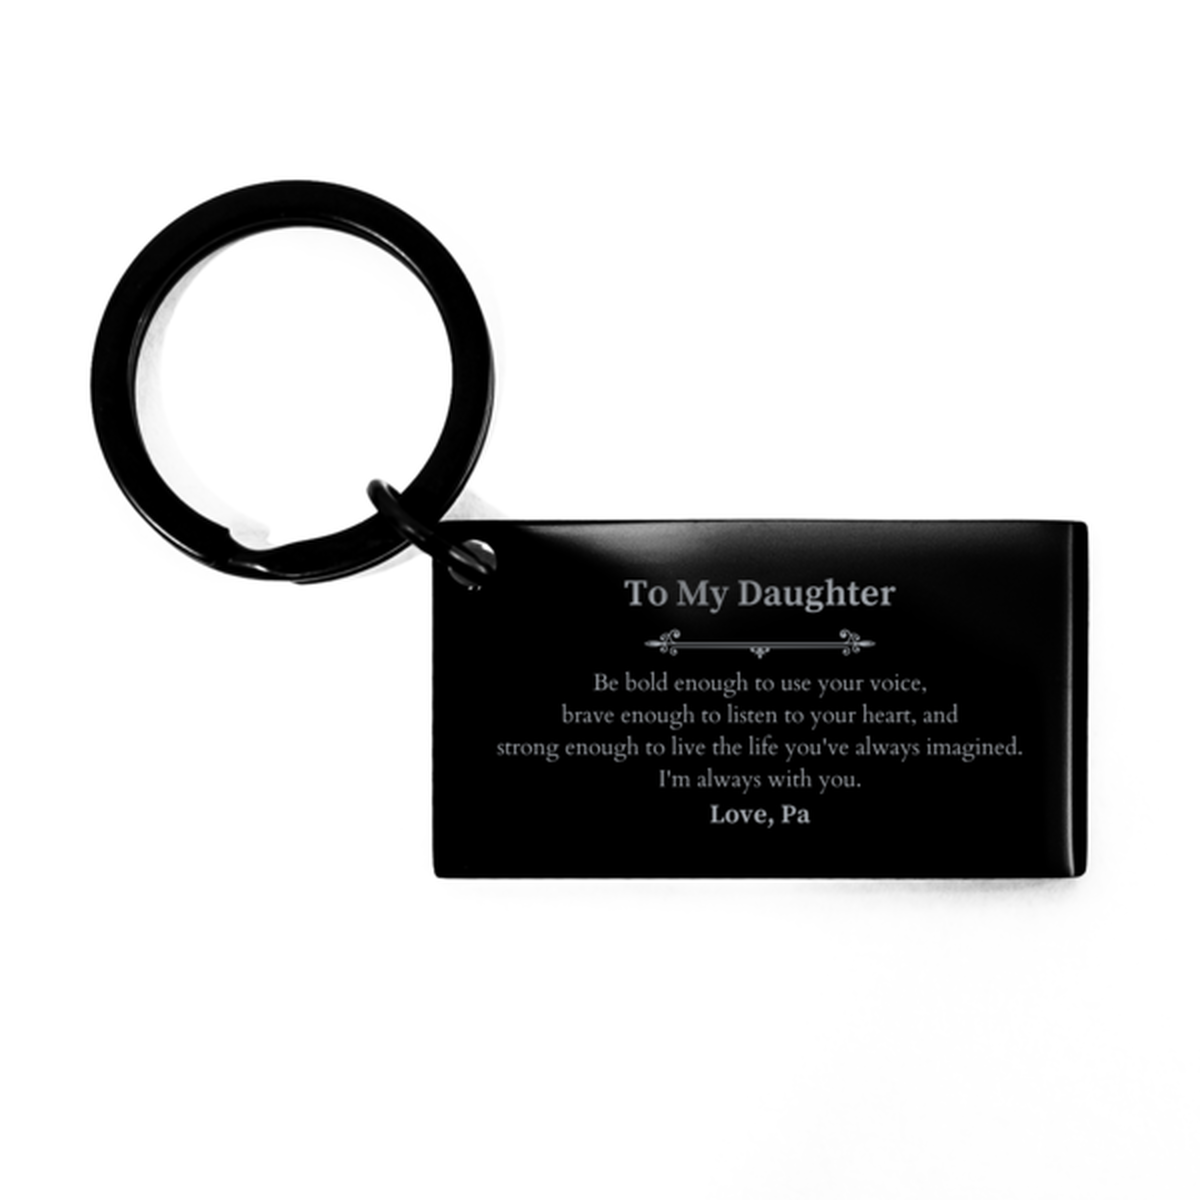 Keepsake Daughter Keychain Gift Idea Graduation Christmas Birthday Daughter from Pa, Daughter Be bold enough to use your voice, brave enough to listen to your heart. Love, Pa